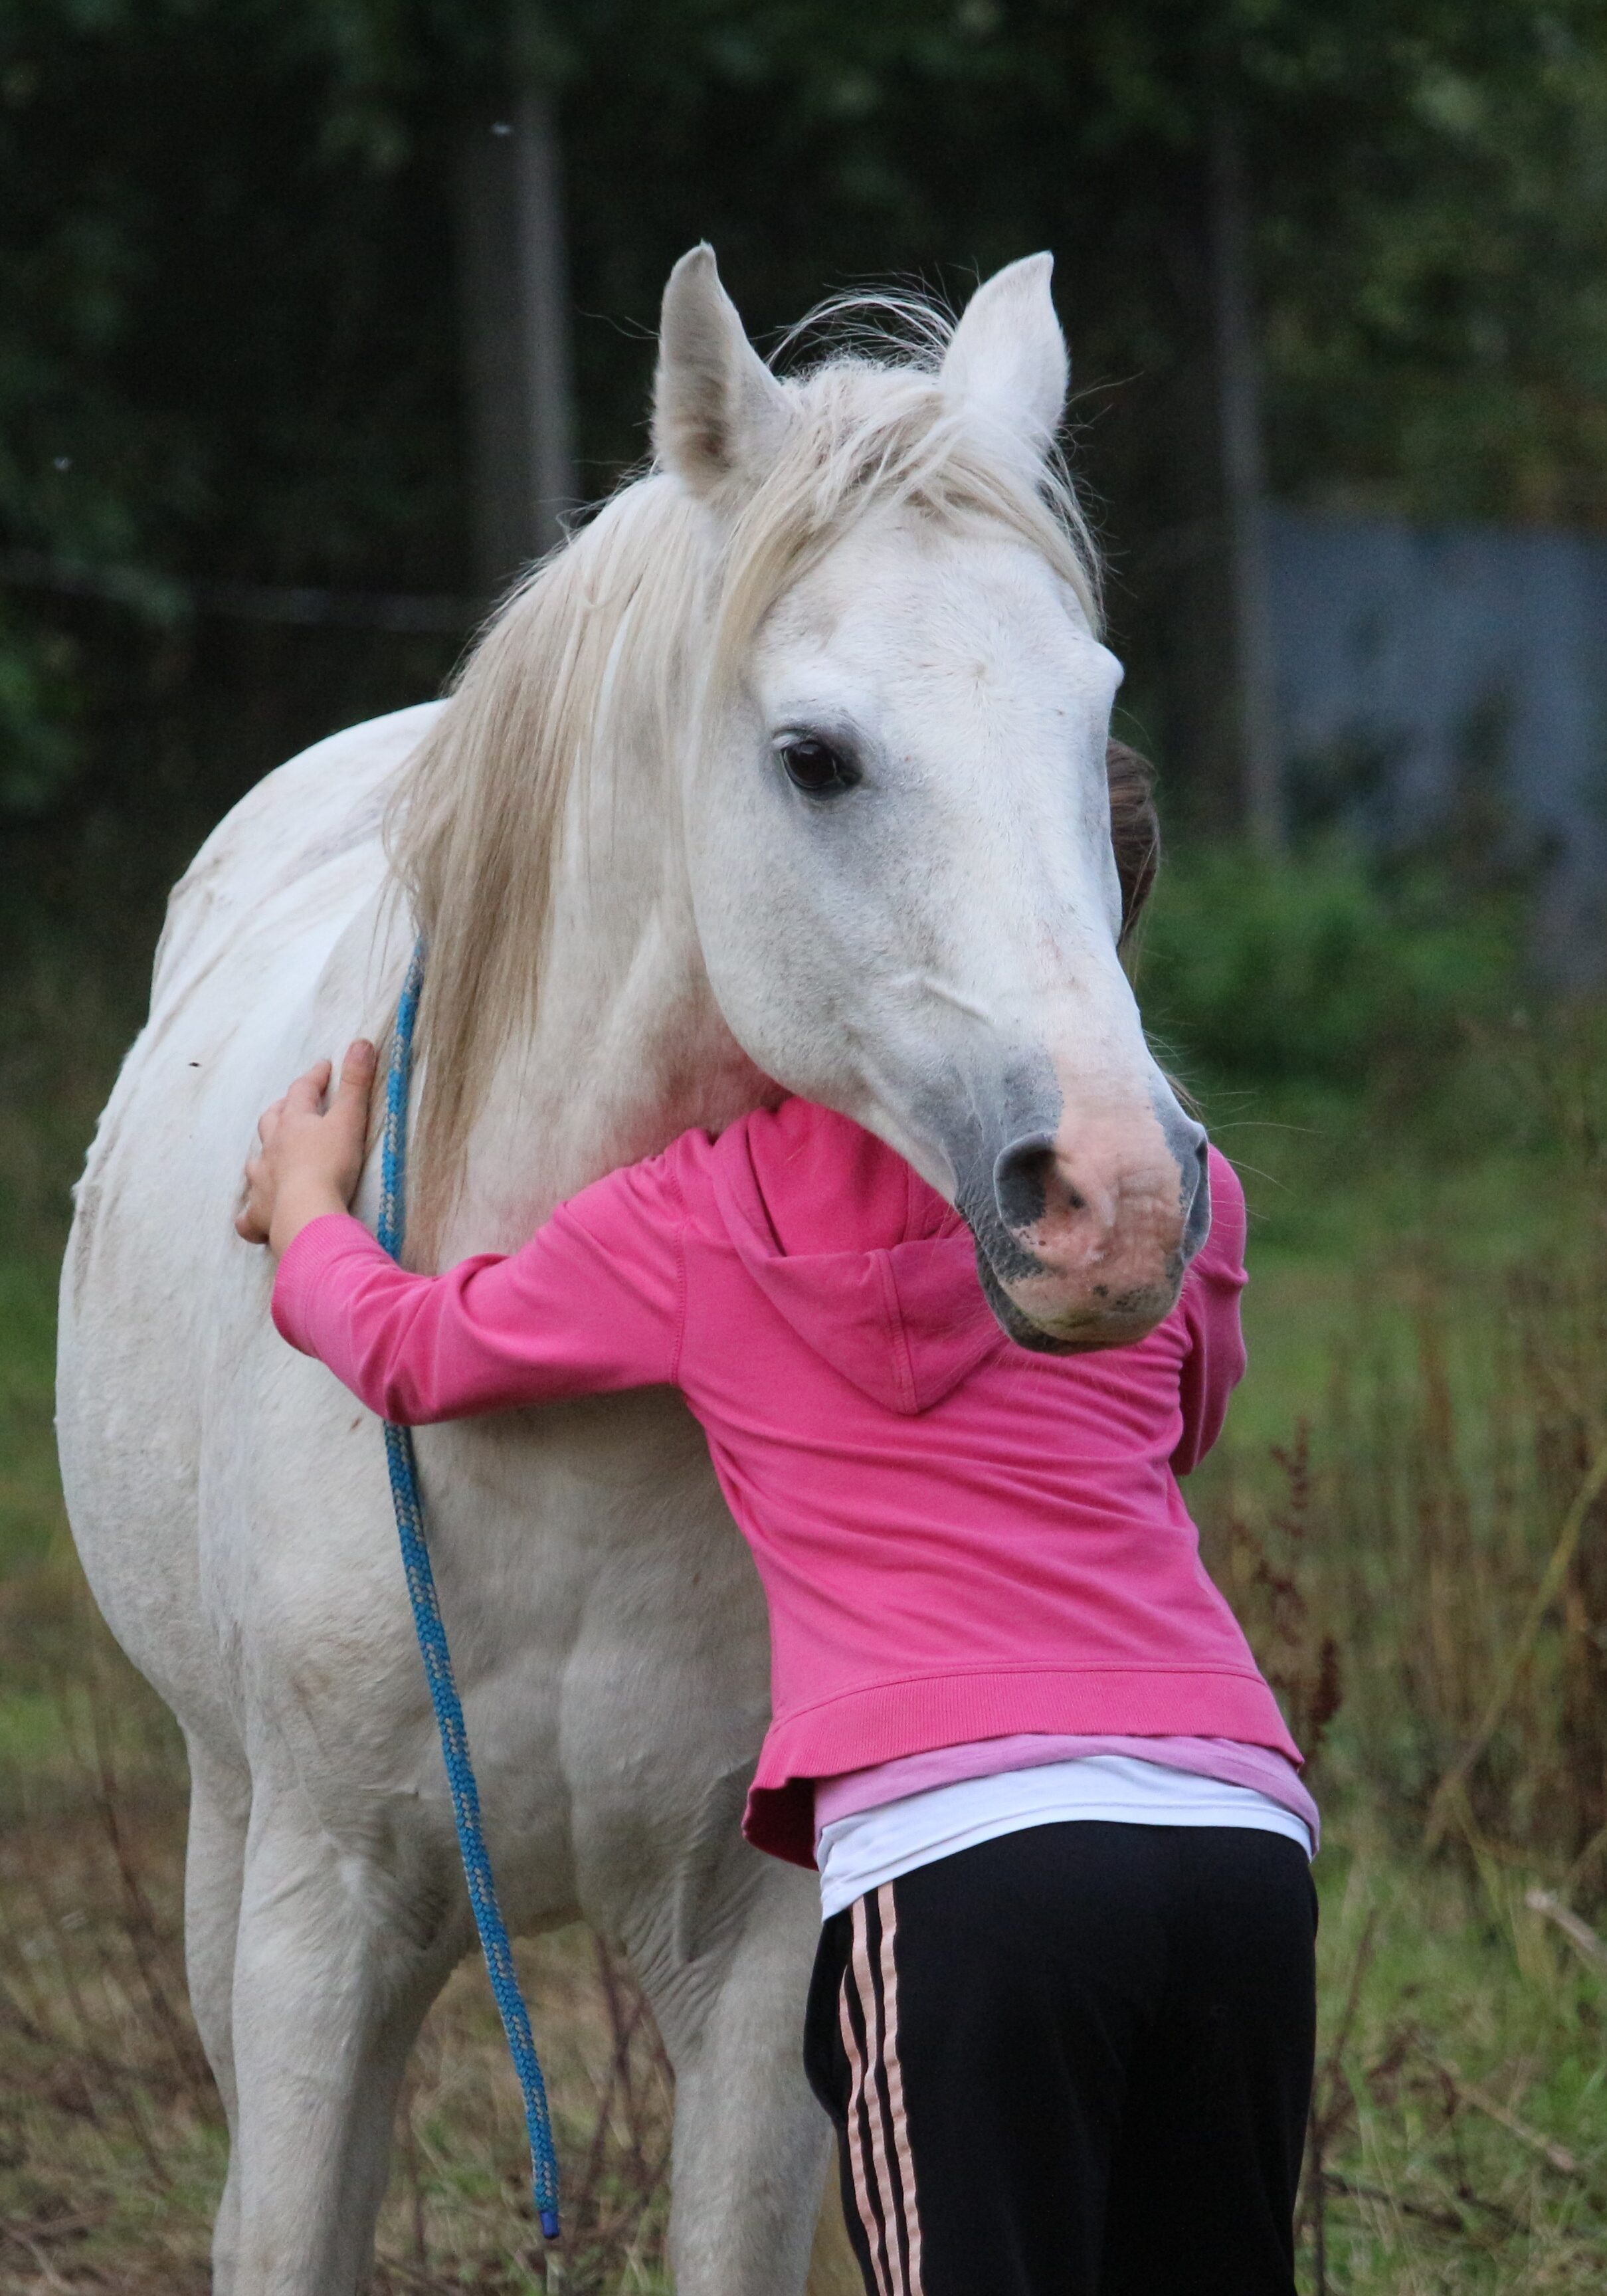 anxious child connected with horse